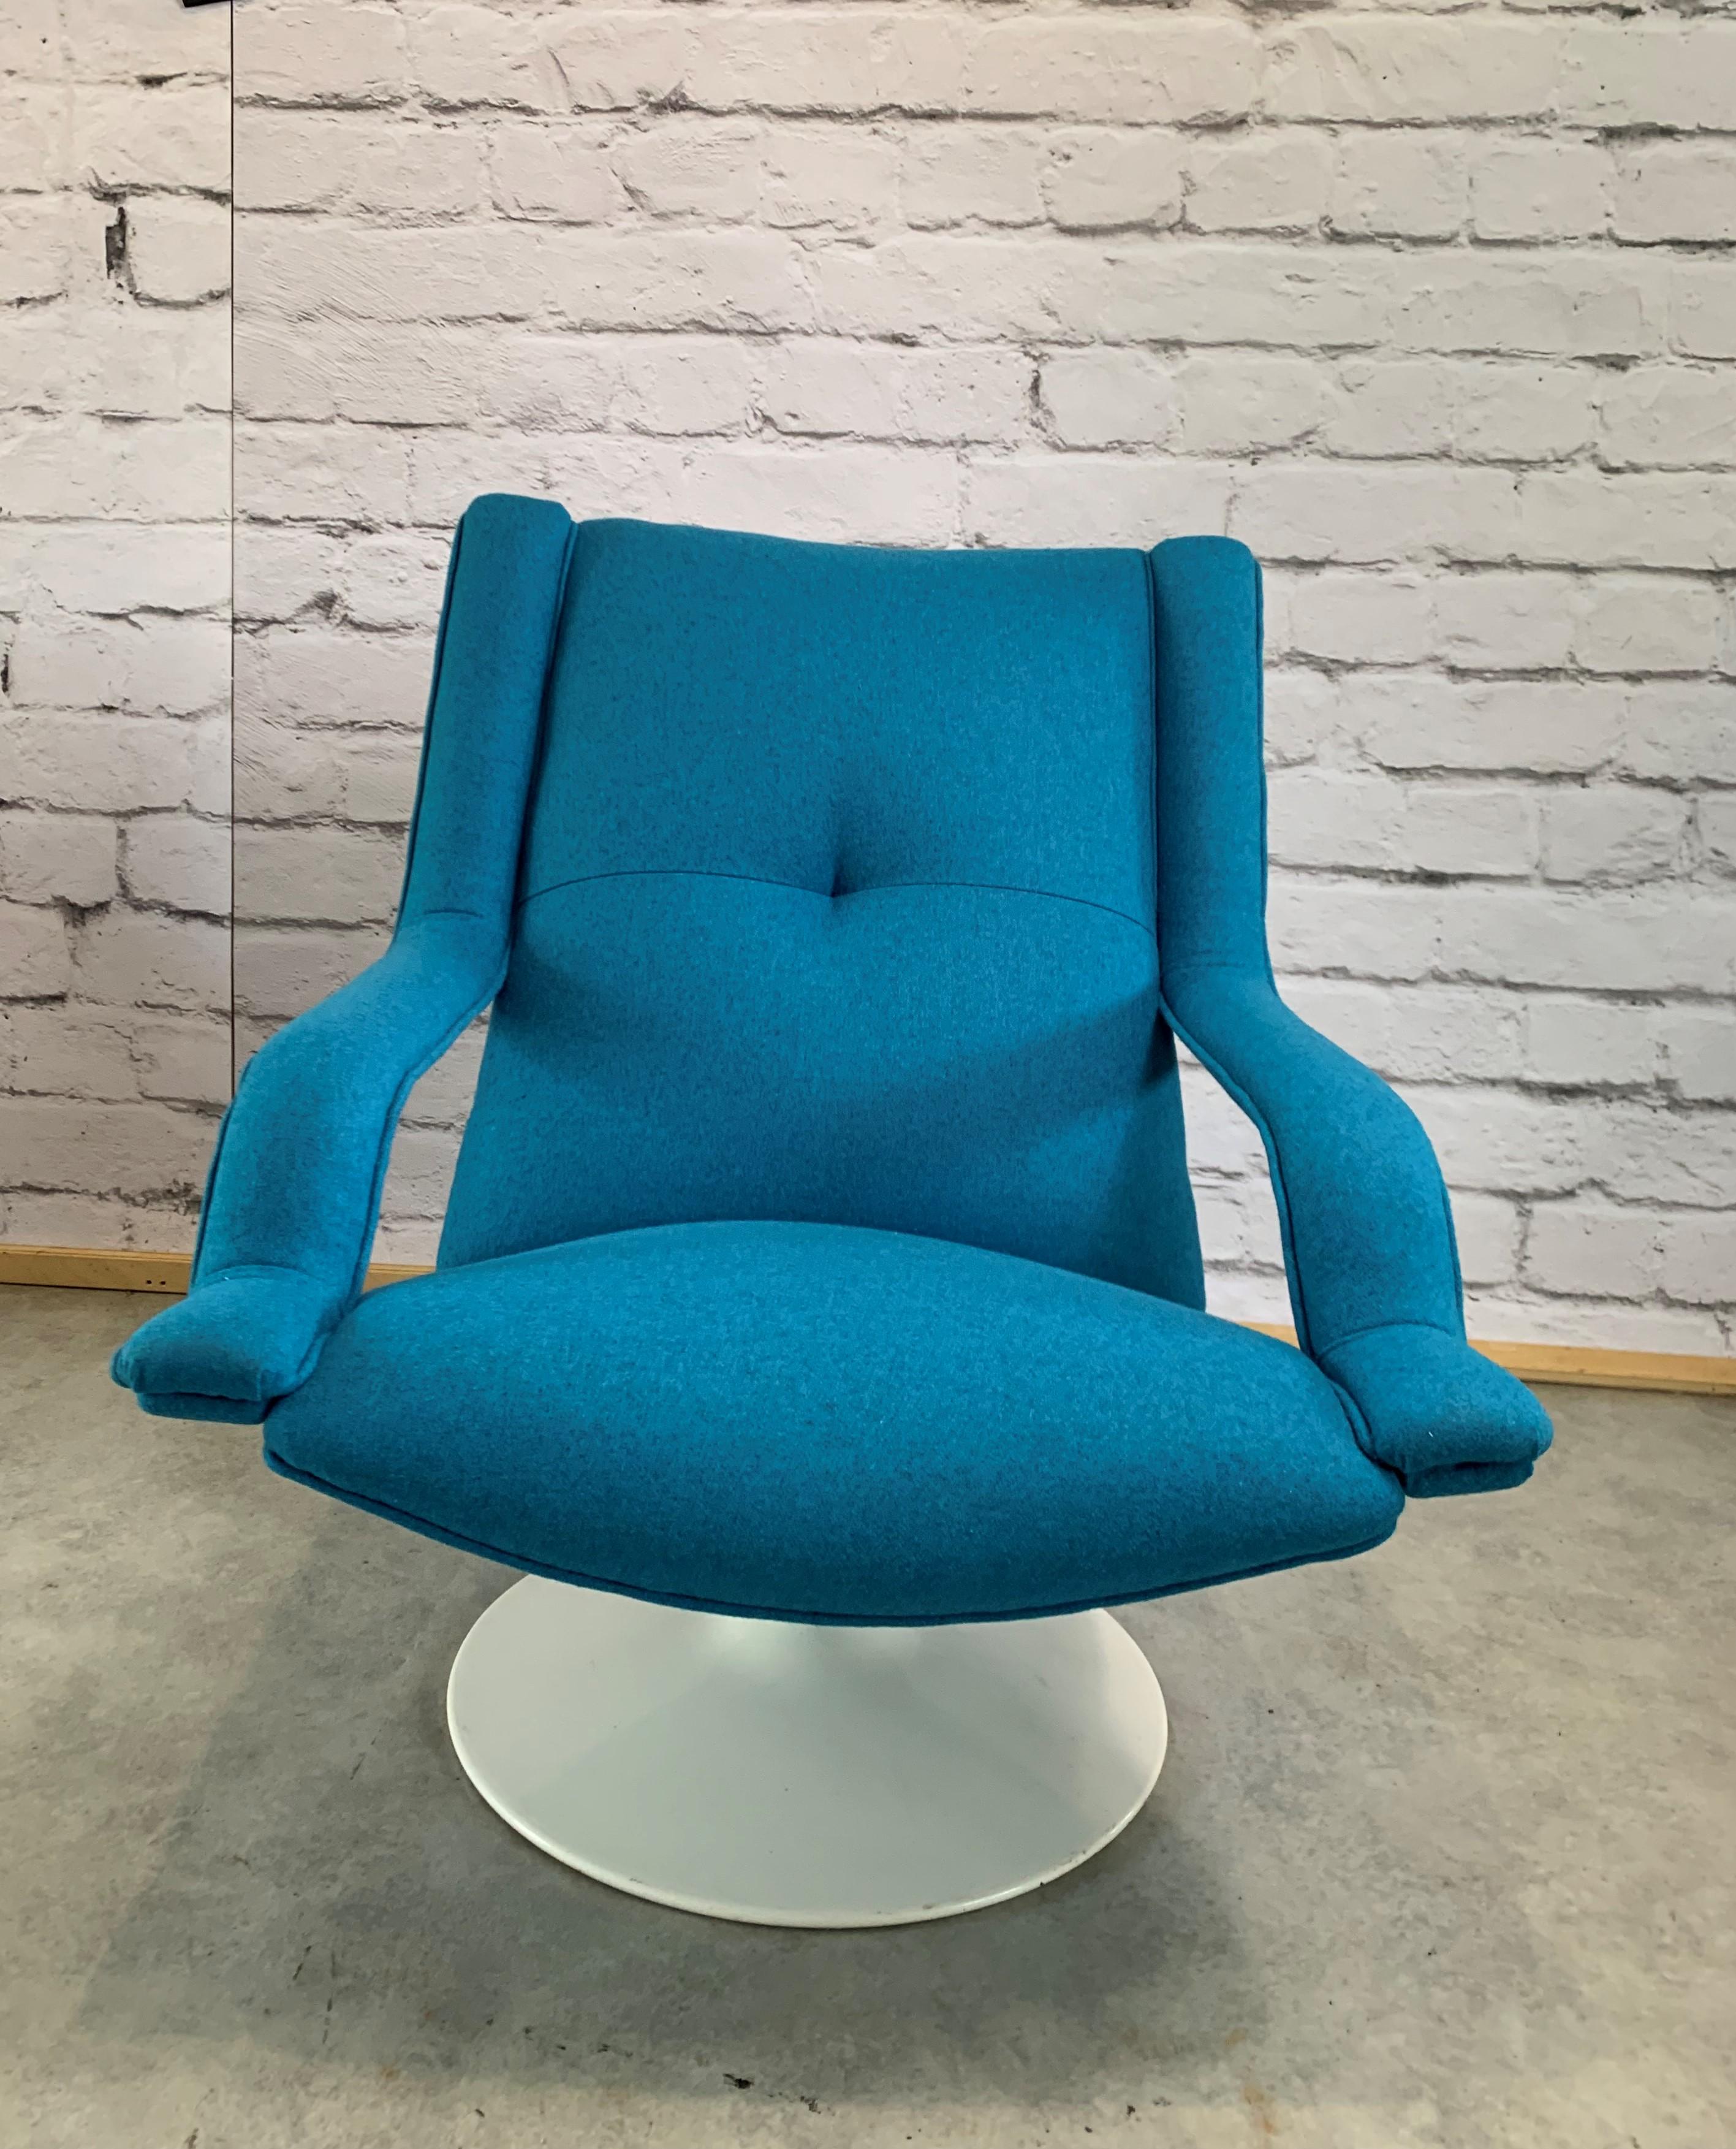 F140 swivel chair designed by Geoffrey Harcourt for Artifort in 1970. This relax chair from the space-age era has a plastic tulip base and elegant armrests. Reupholstered with beutiful blue colour wool. Great piece of design.